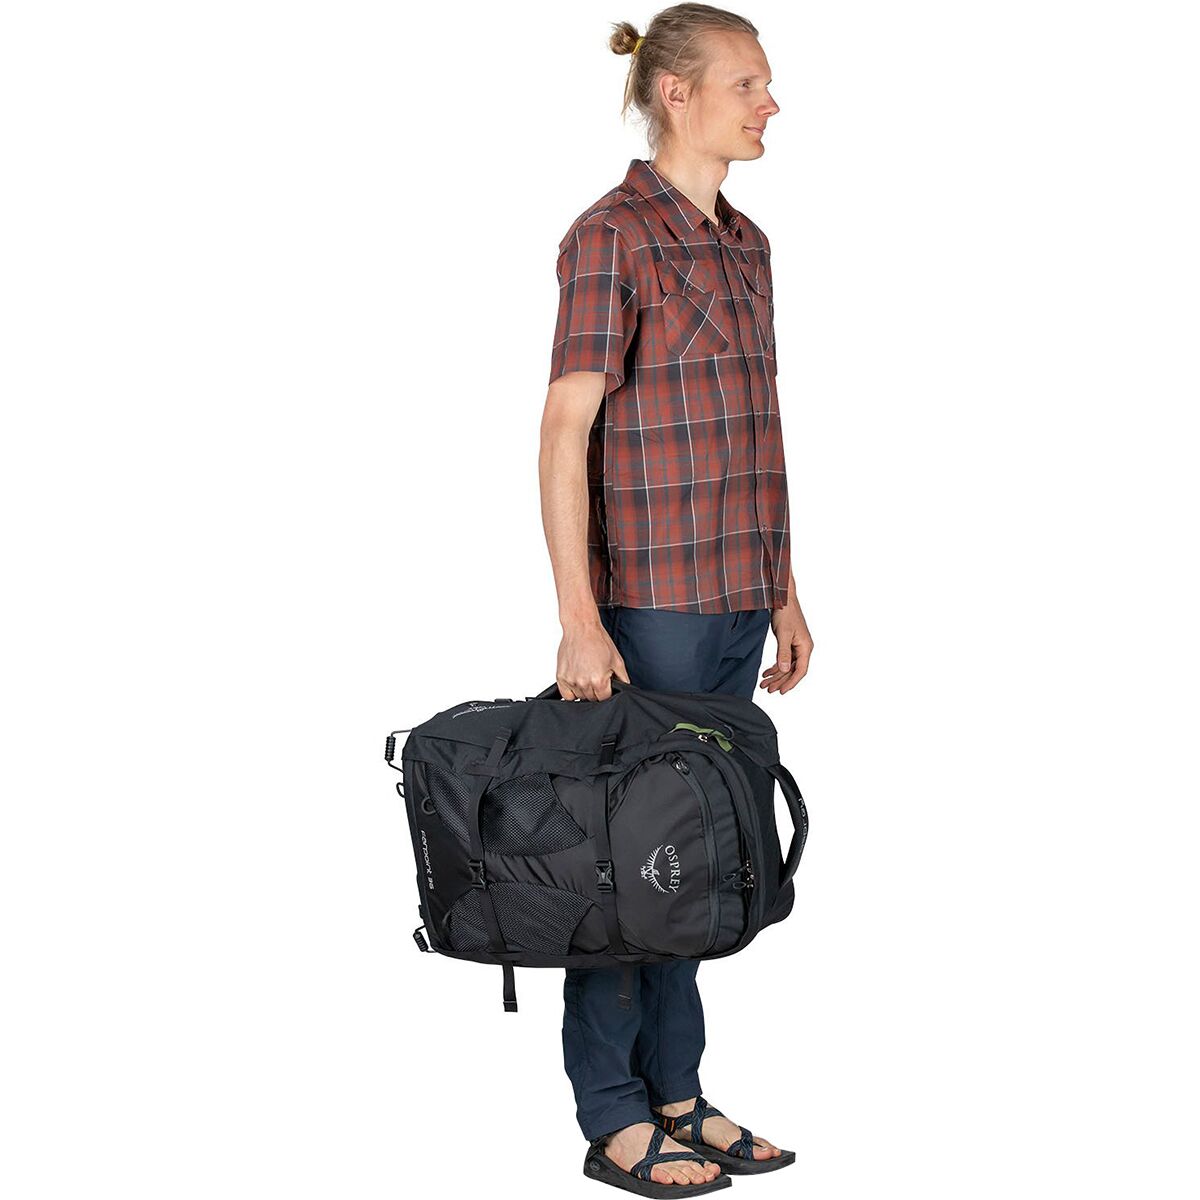 Farpoint® Wheeled Travel Carry-On 36L/21.5 - Men's Adventure Luggage